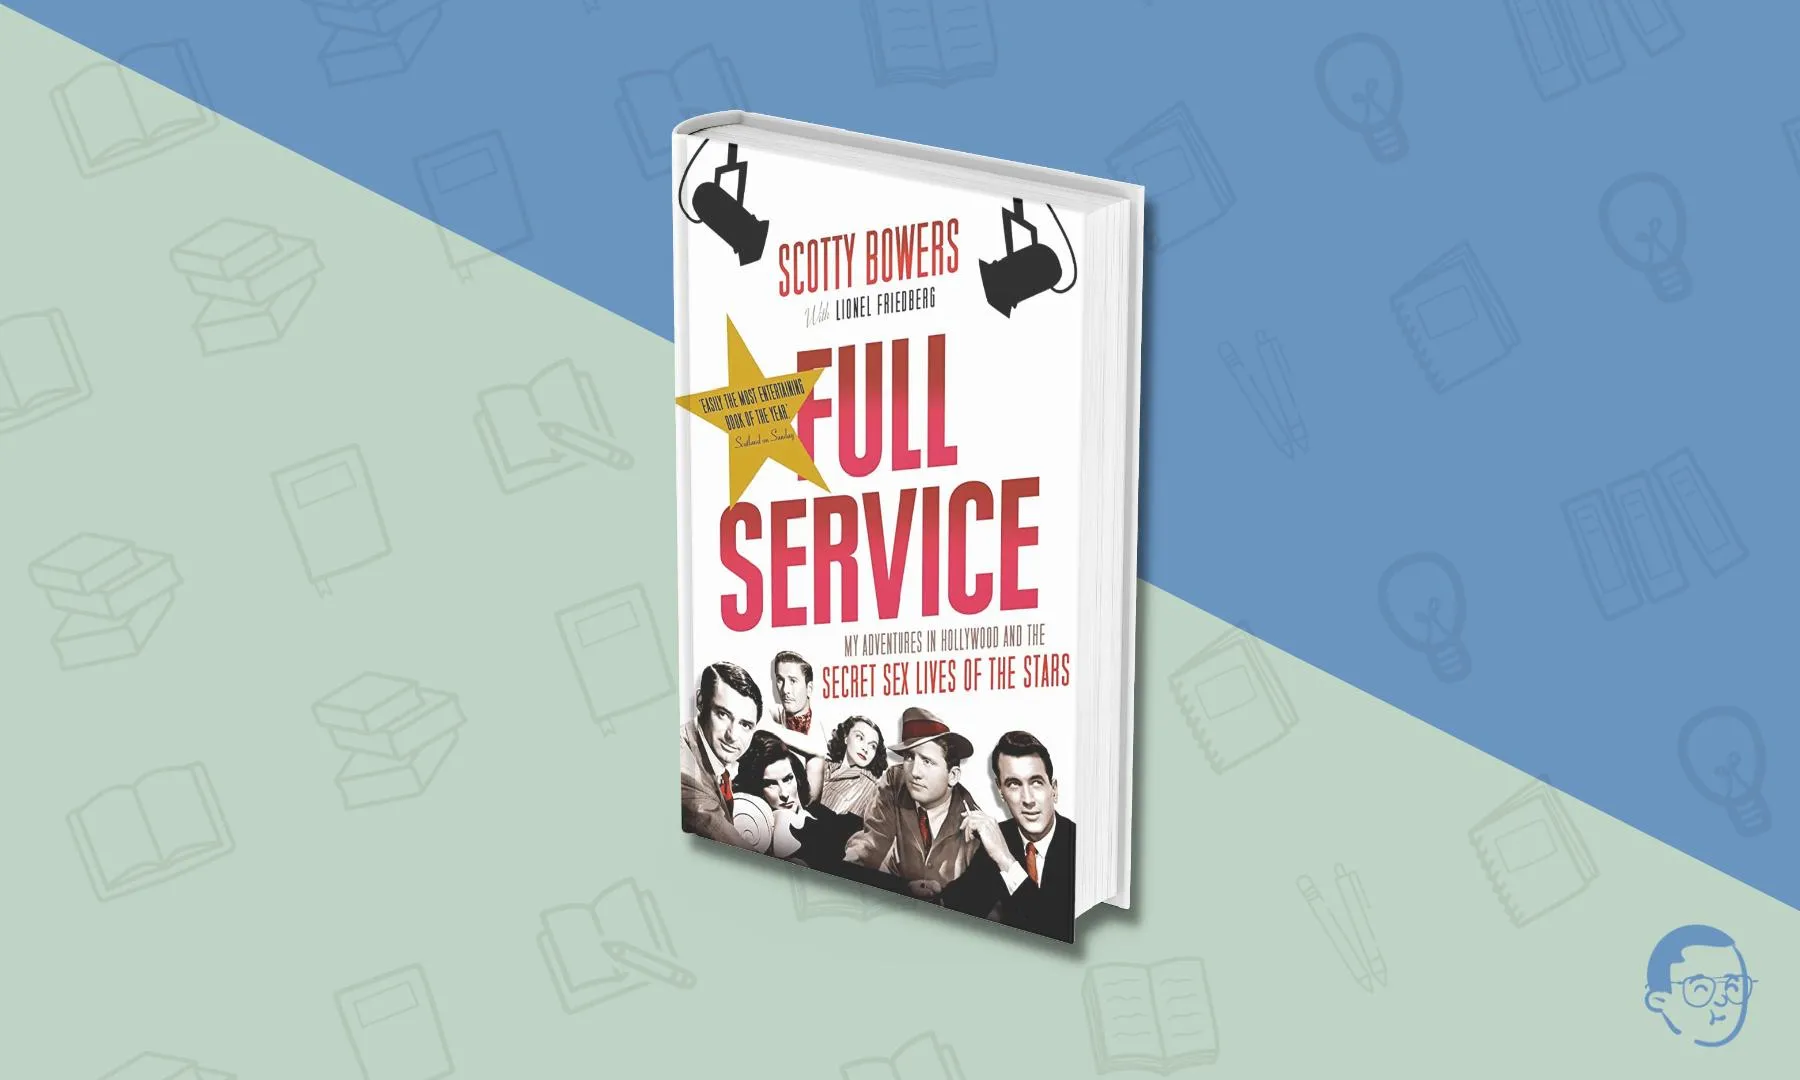 Full Service by Scotty Bowers